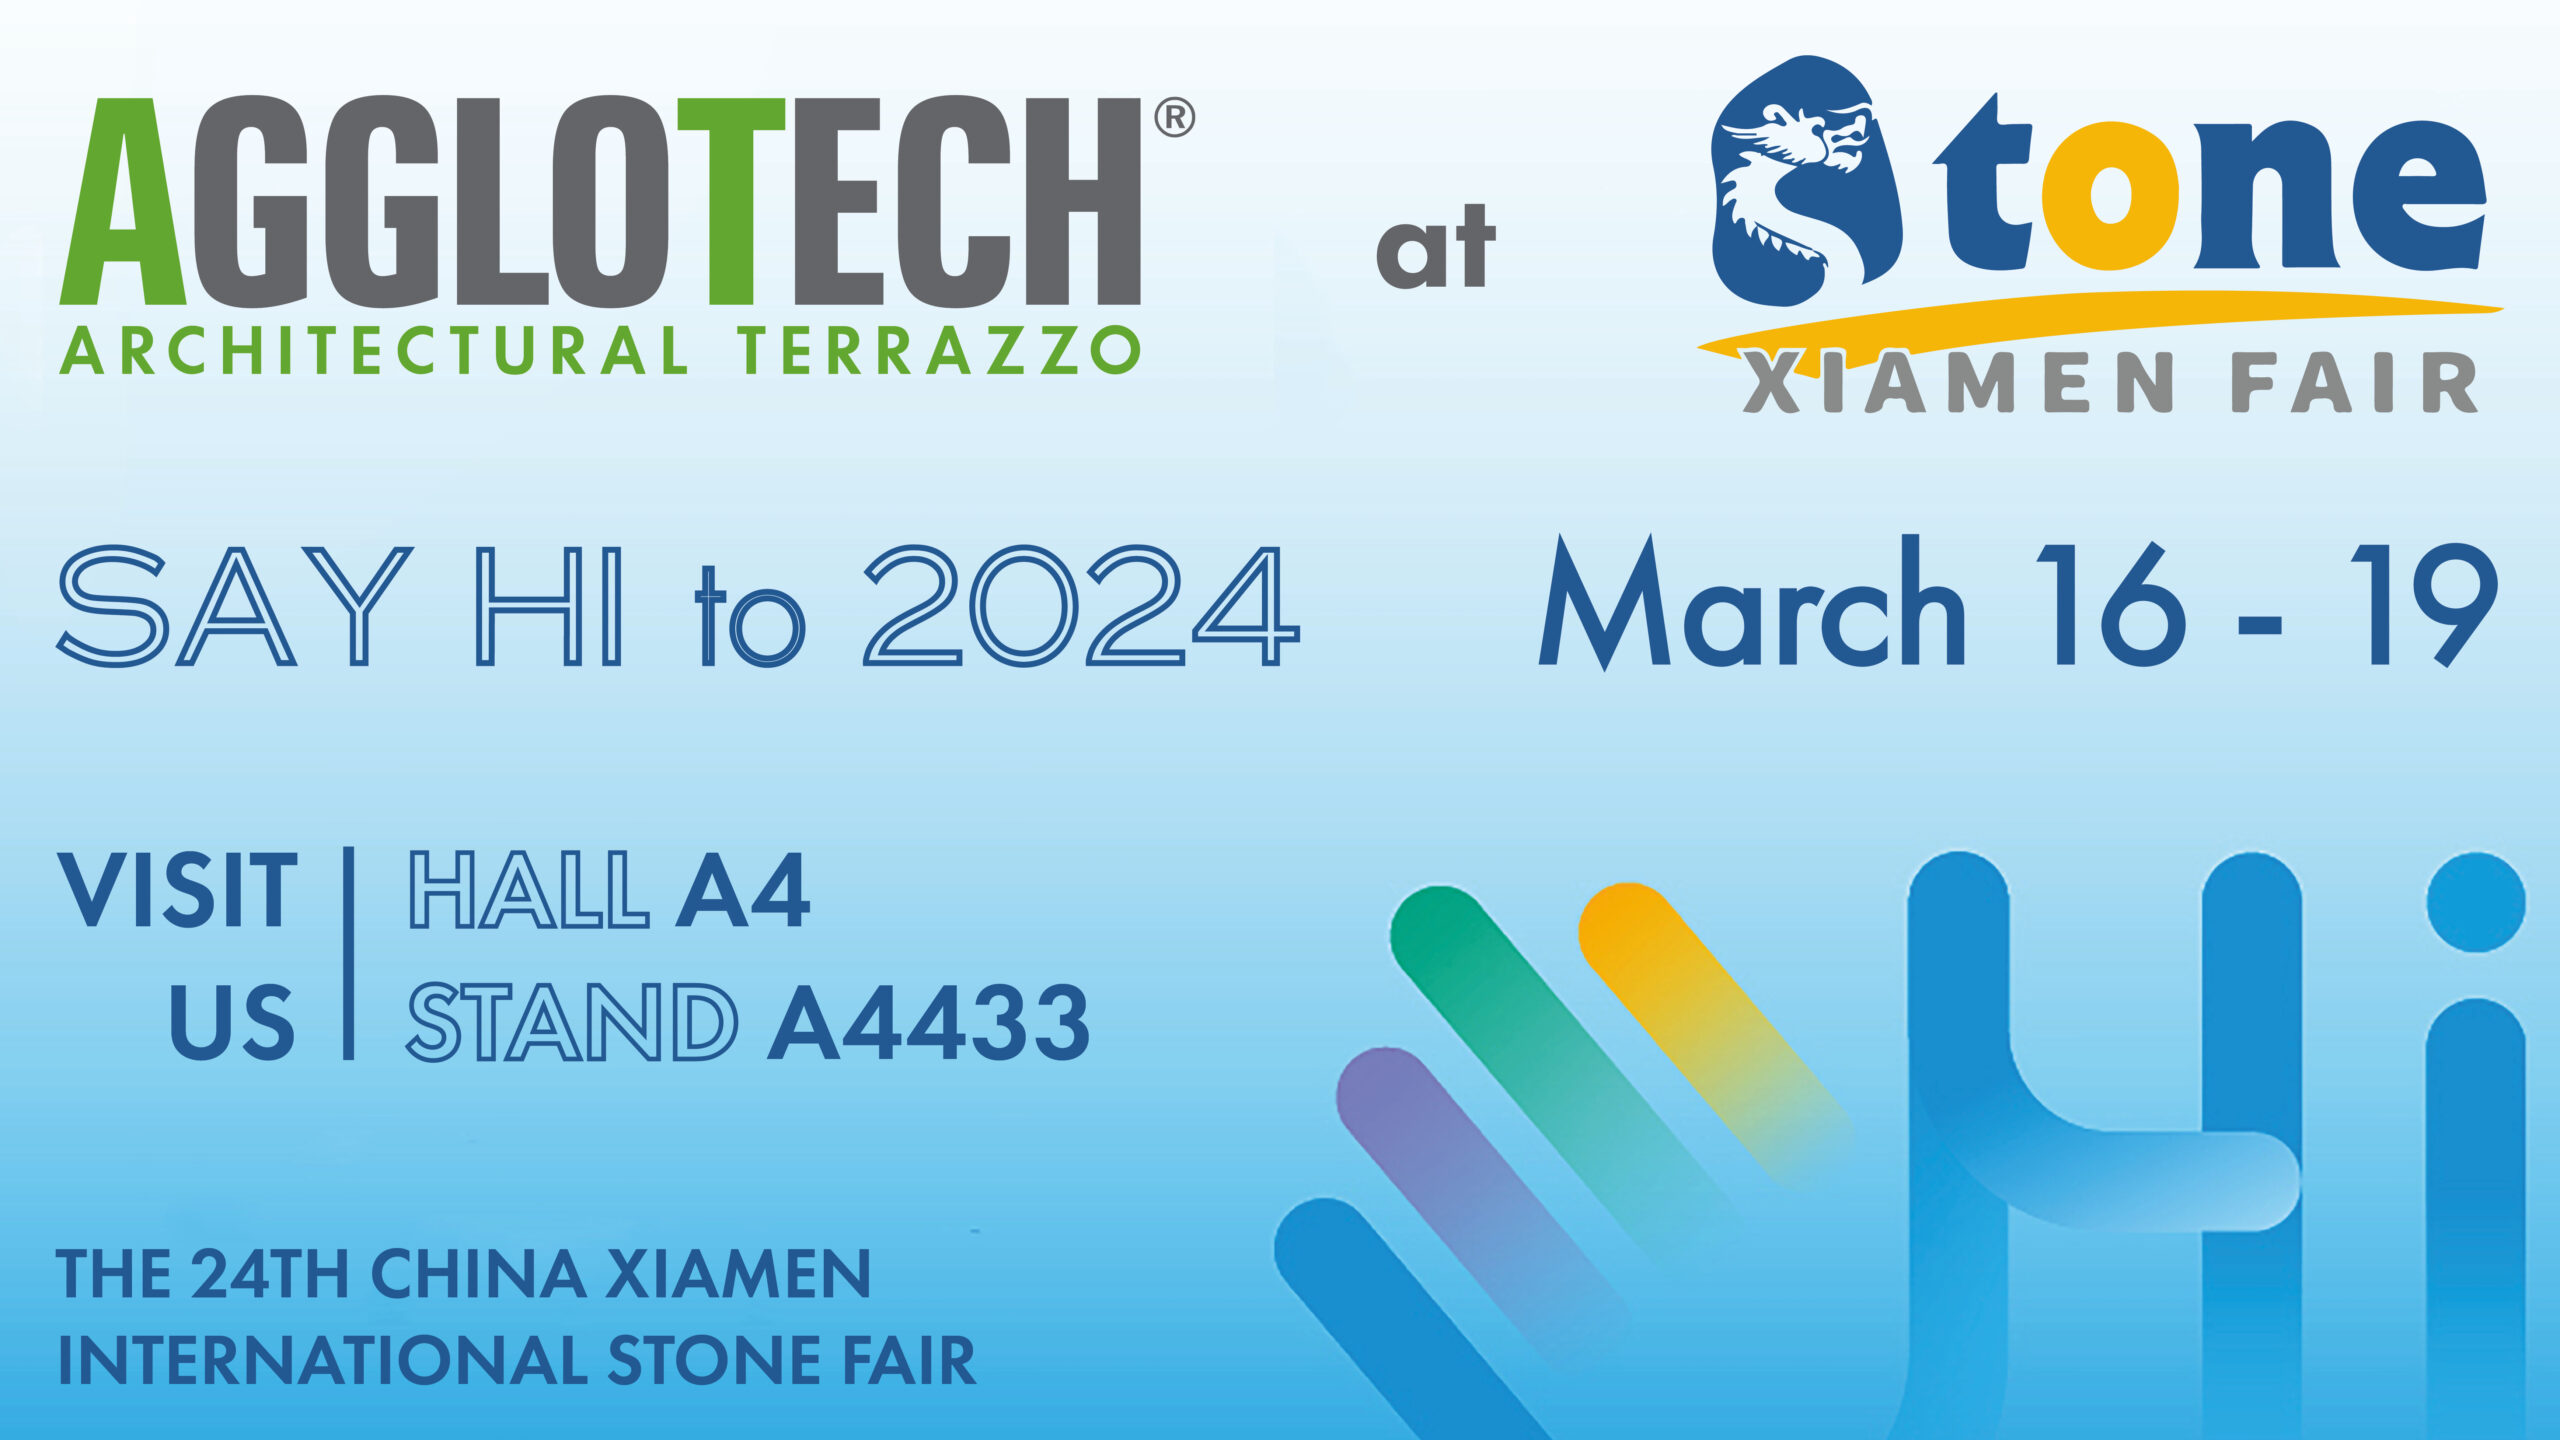 16 — 19 March 2024: Agglotech is waiting for you in Xiamen